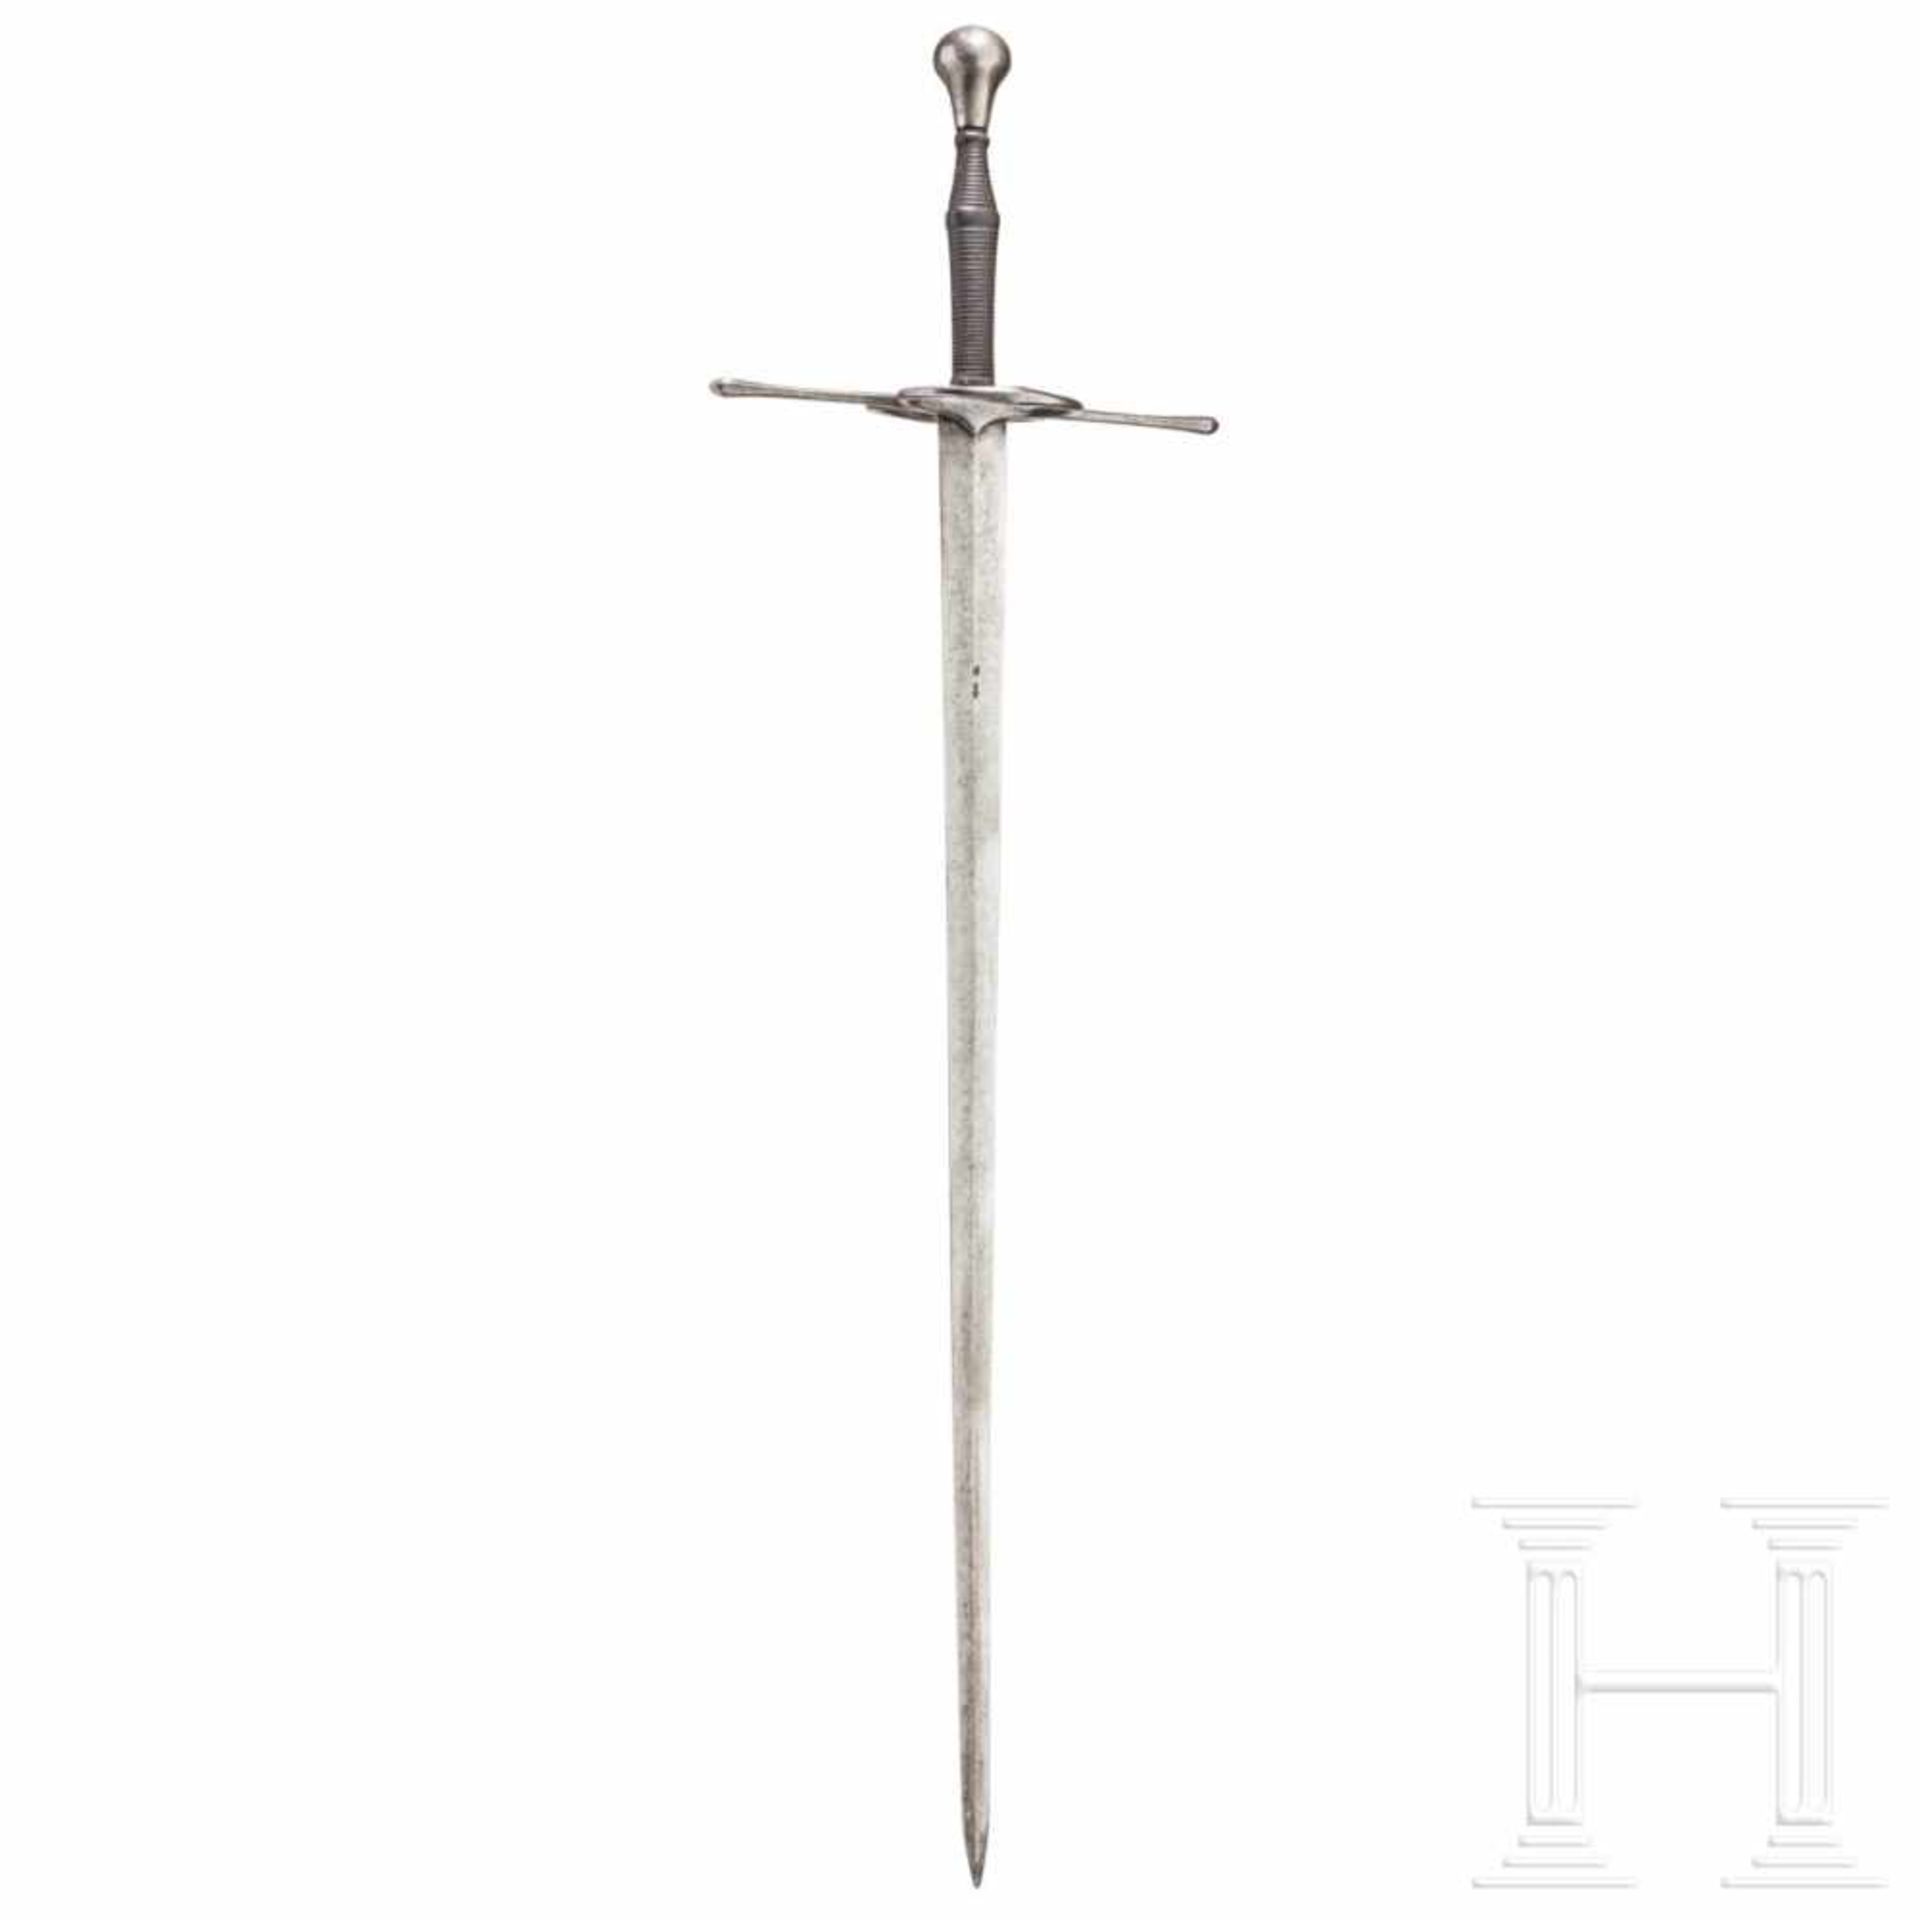 A South German or Swiss hand-and-a-half riding sword, circa 1550The double-edged, slightly conical